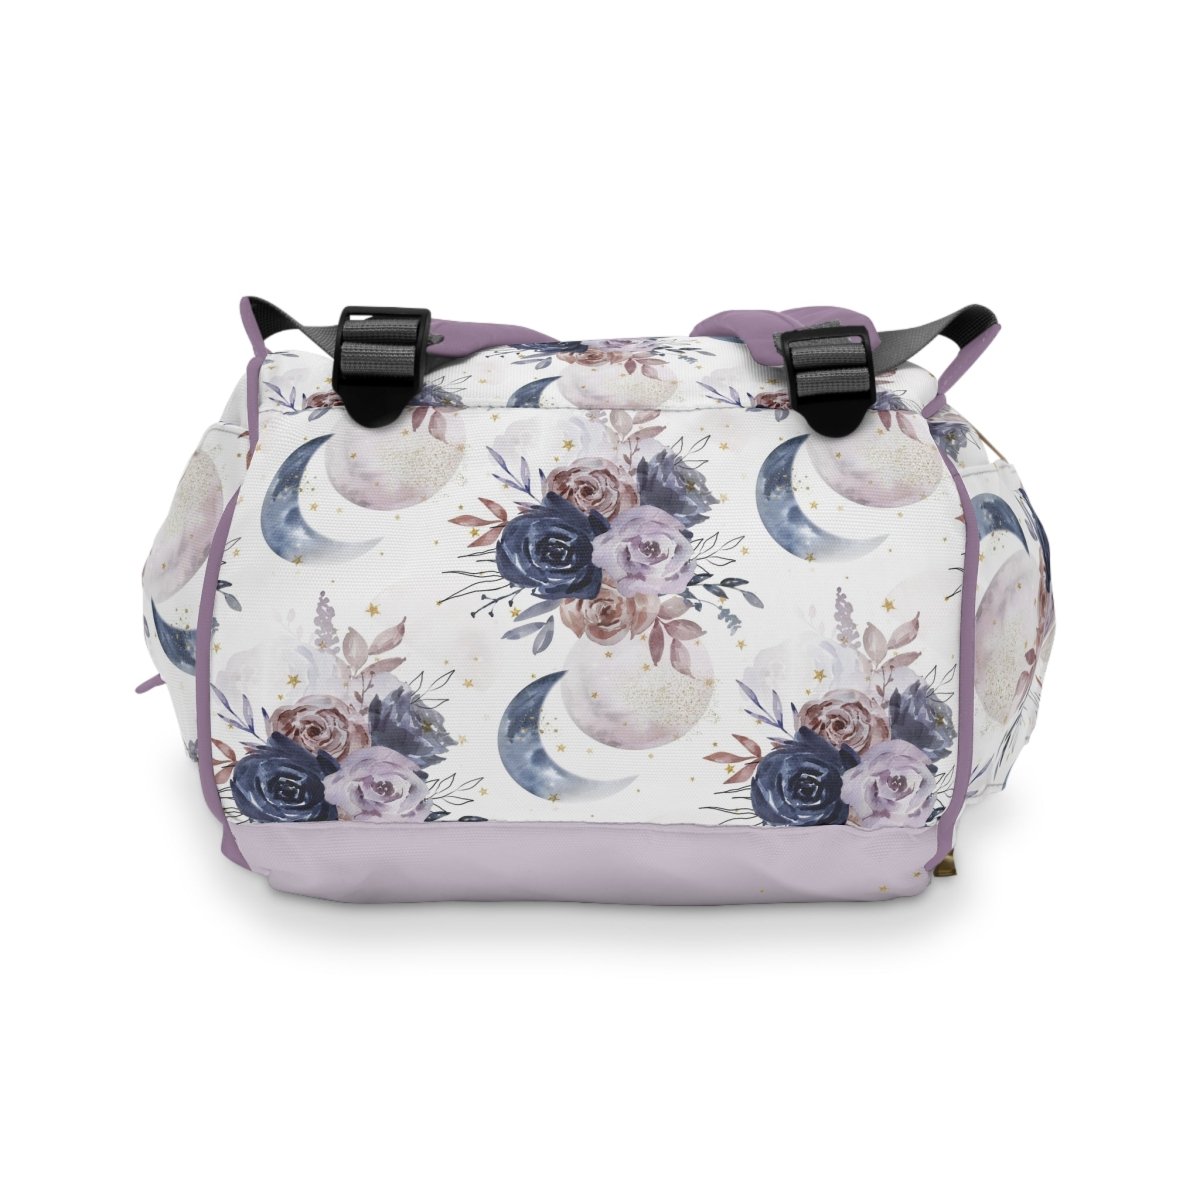 Floral Moon Personalized Backpack Diaper Bag - Floral Moon, gender_girl, text